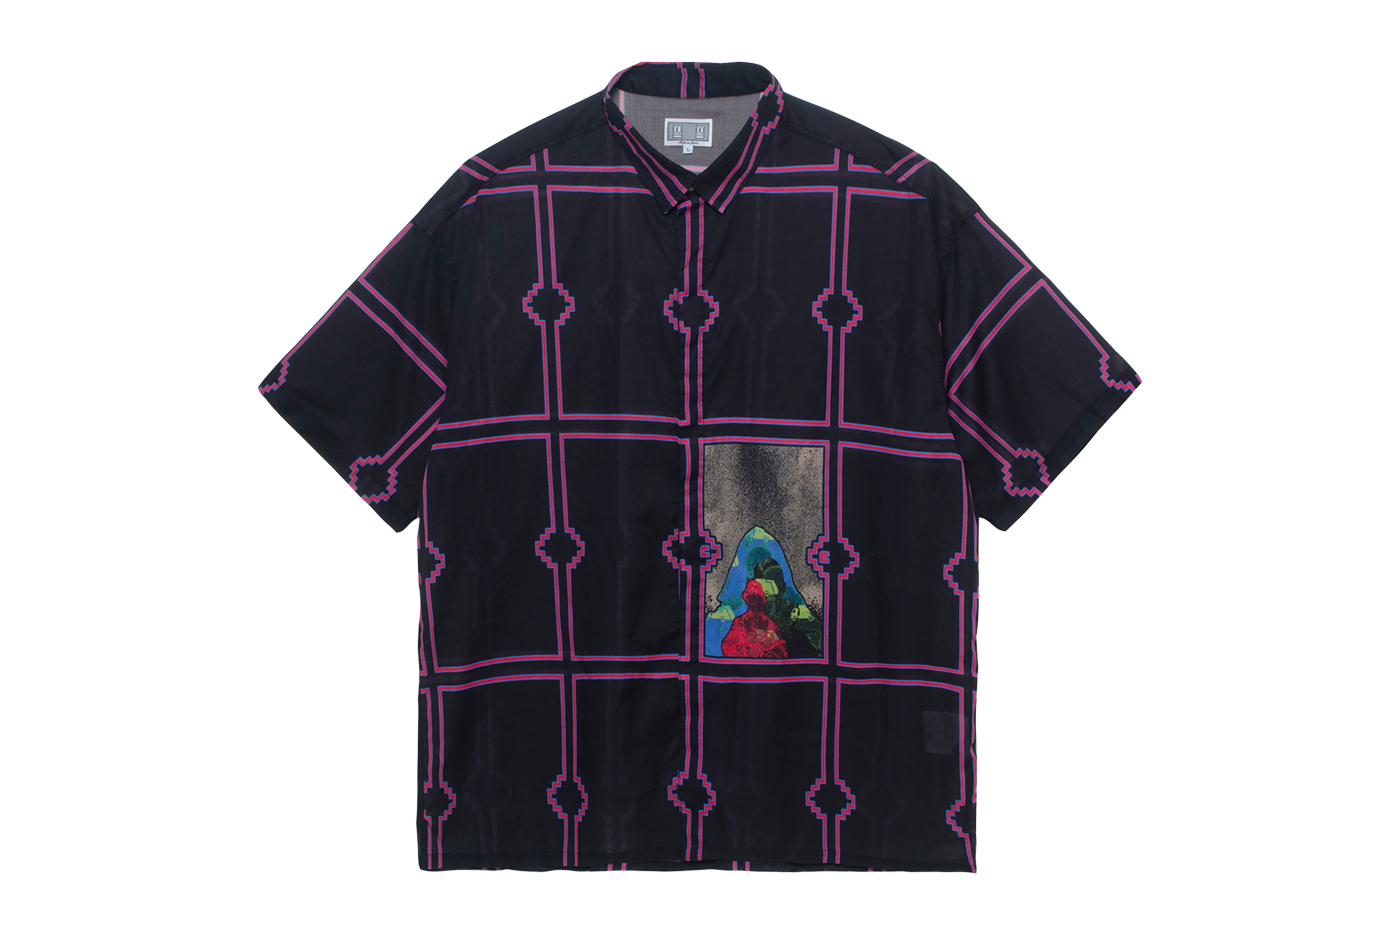 Cav Empt Drop 15 Spring/Summer 2020 Collection FRAME SHORT SLEEVE SHIRT BACK VIEW T OVERDYE CHEMISTRY T TAPED LIGHT SHORTS OVERDYE MESH T PATCHED BACK PACK sk8thing toby feltwell japanese streetwear